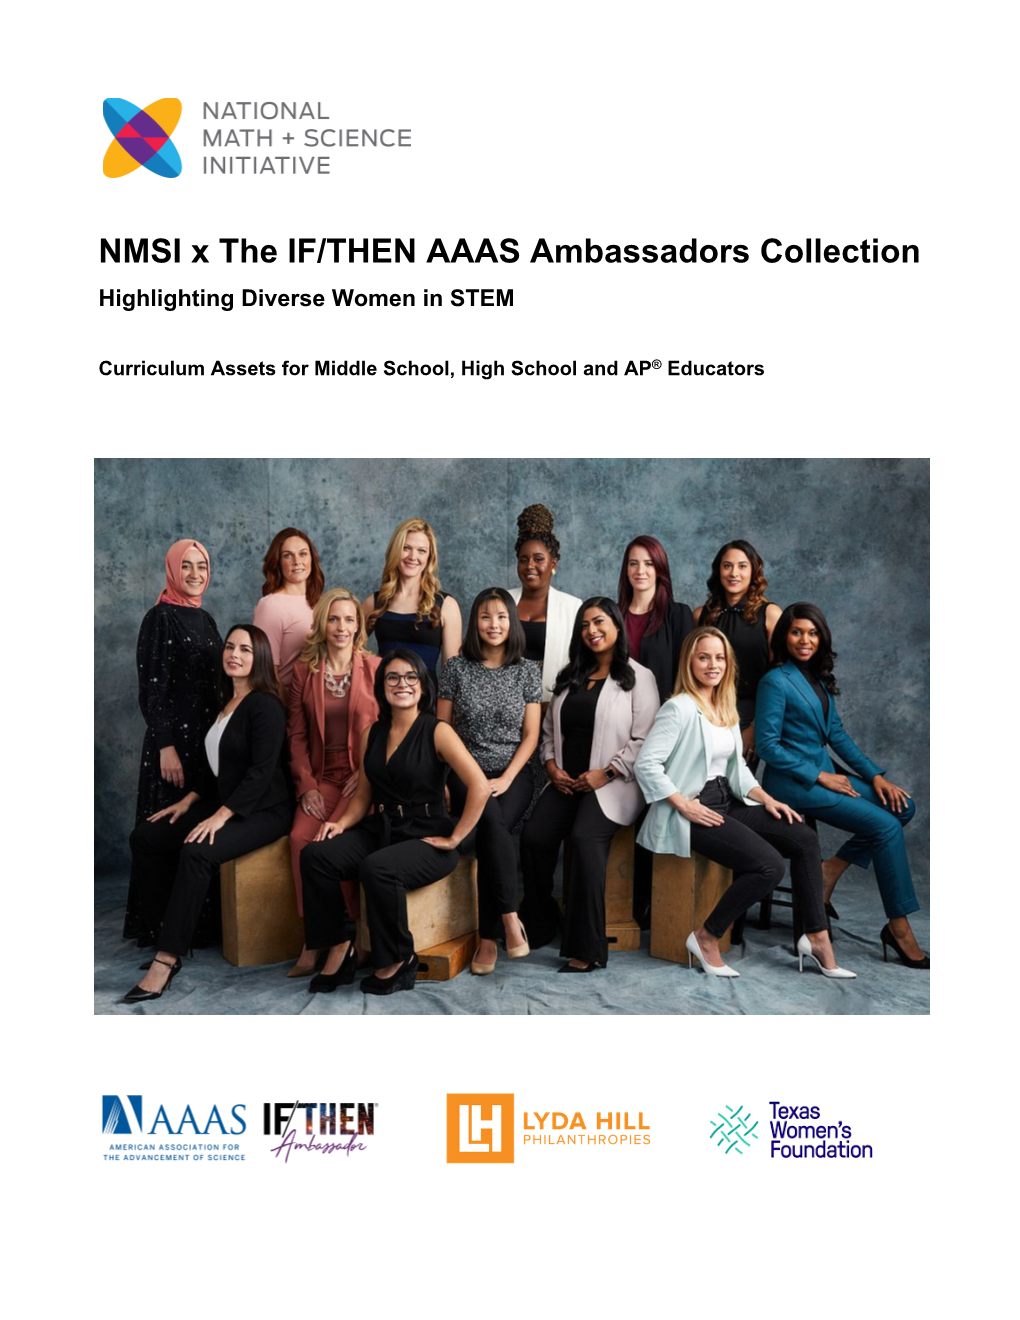 NMSI X the IF/THEN AAAS Ambassadors Collection Highlighting Diverse Women in STEM